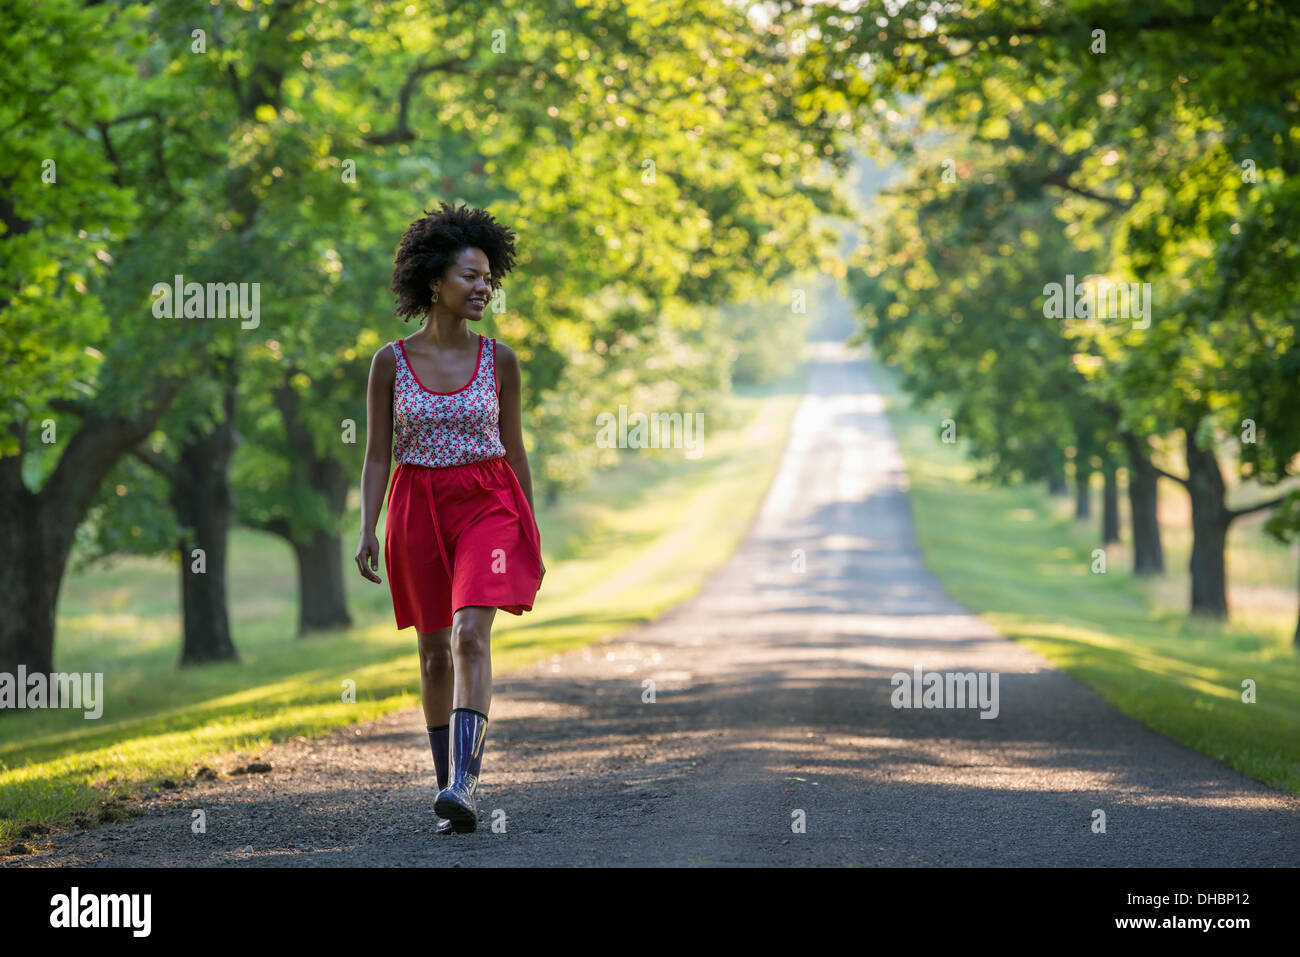 A woman walking down a tree lined path. Stock Photo